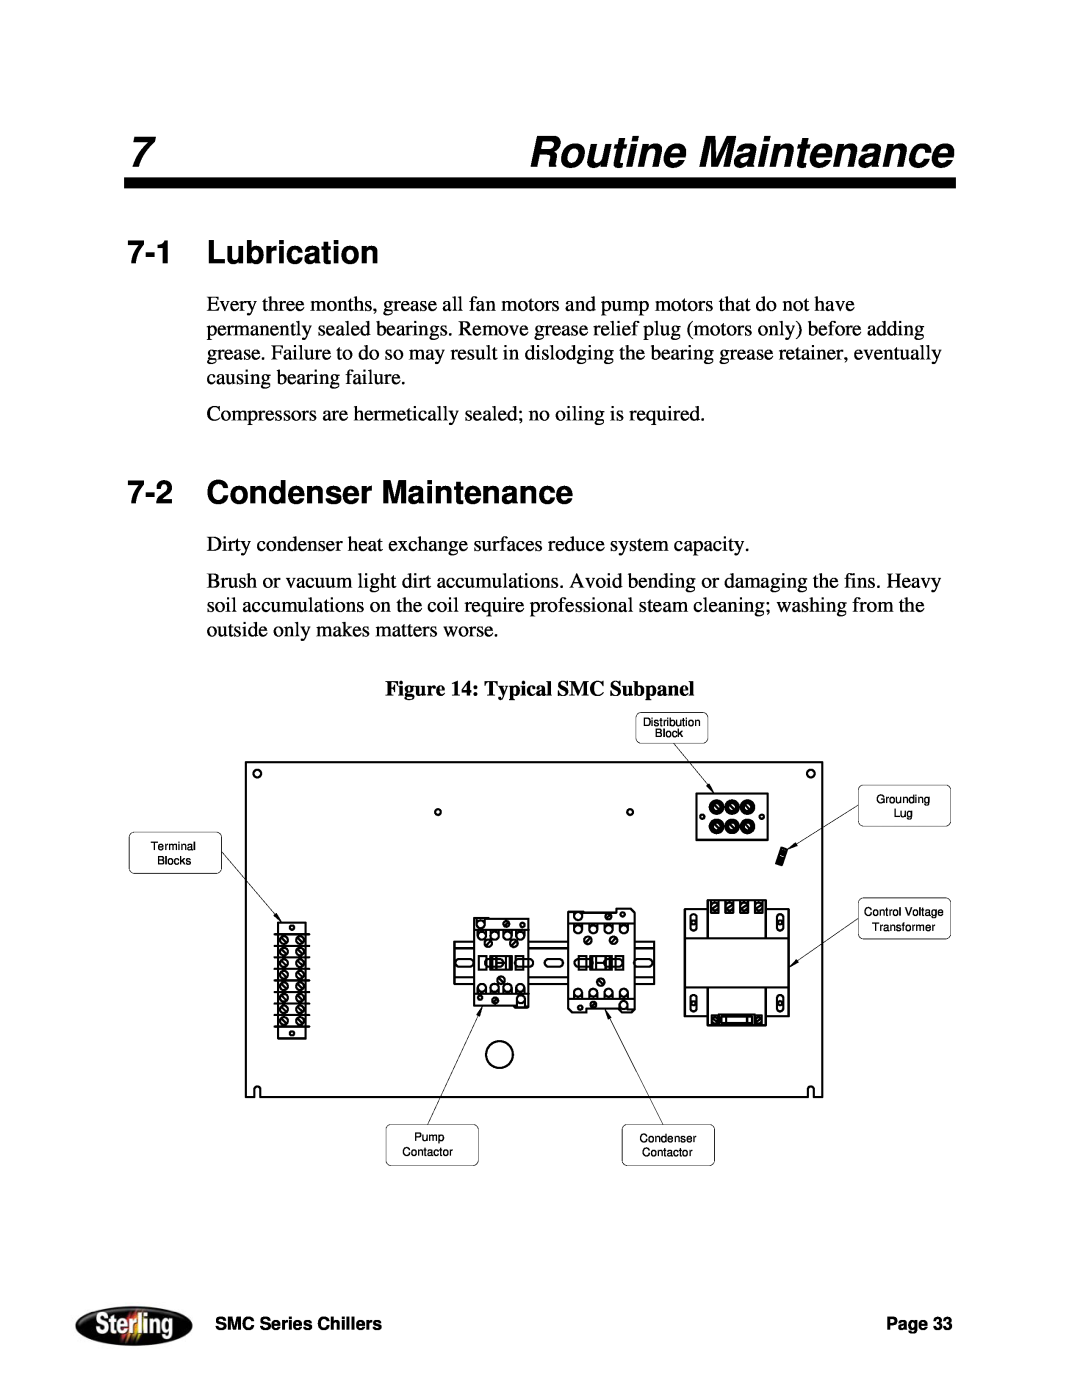 Sterling Power Products 30F to 65F installation manual Routine Maintenance, 7-1Lubrication, 7-2Condenser Maintenance 